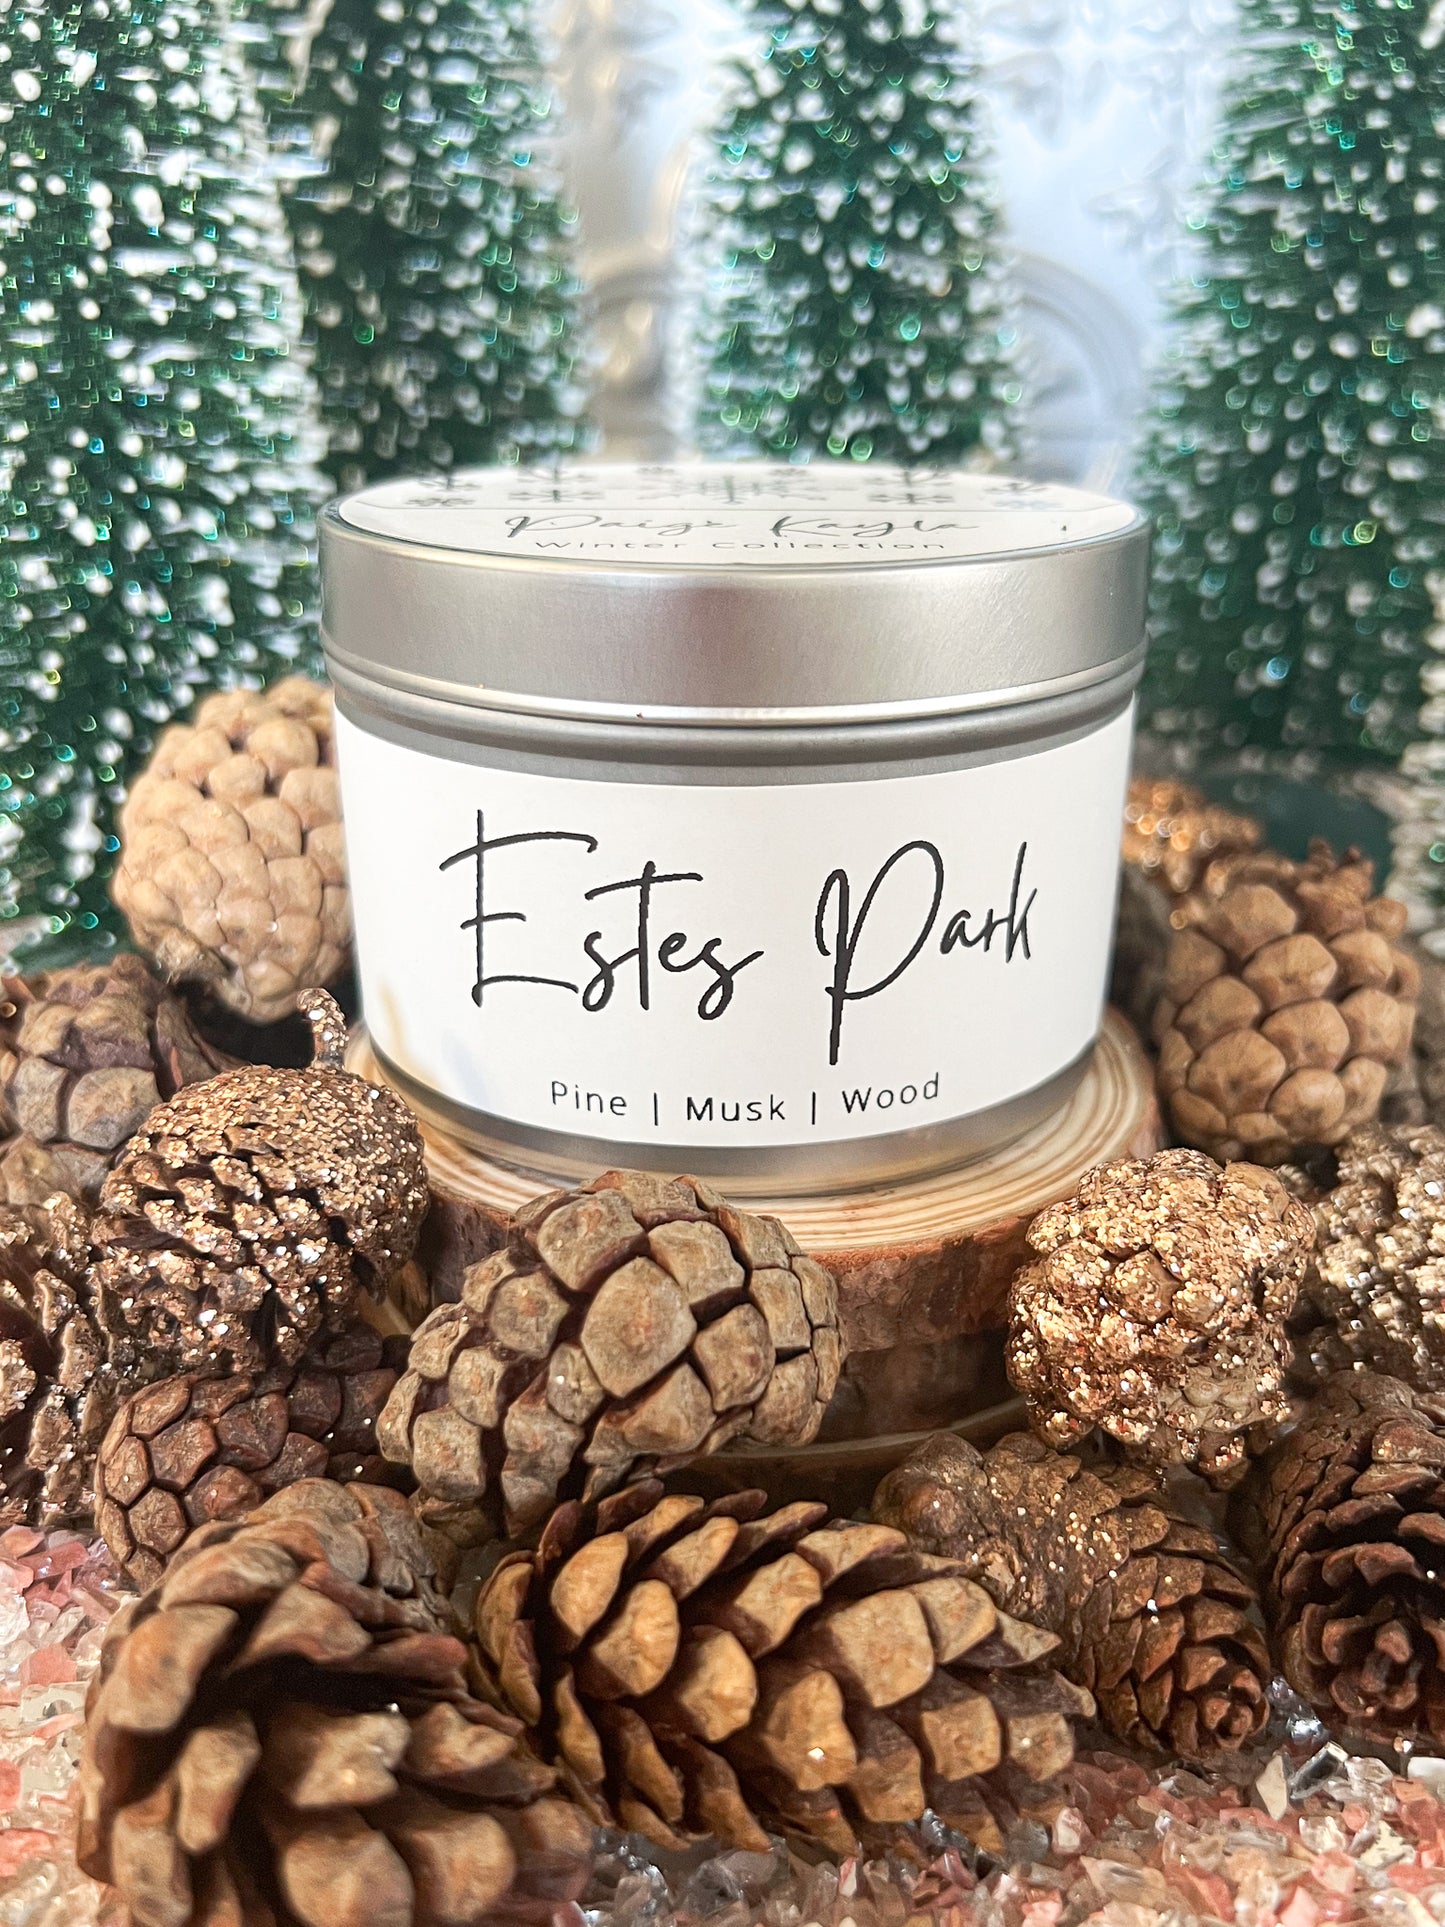 Winter Collection Candle Bundle